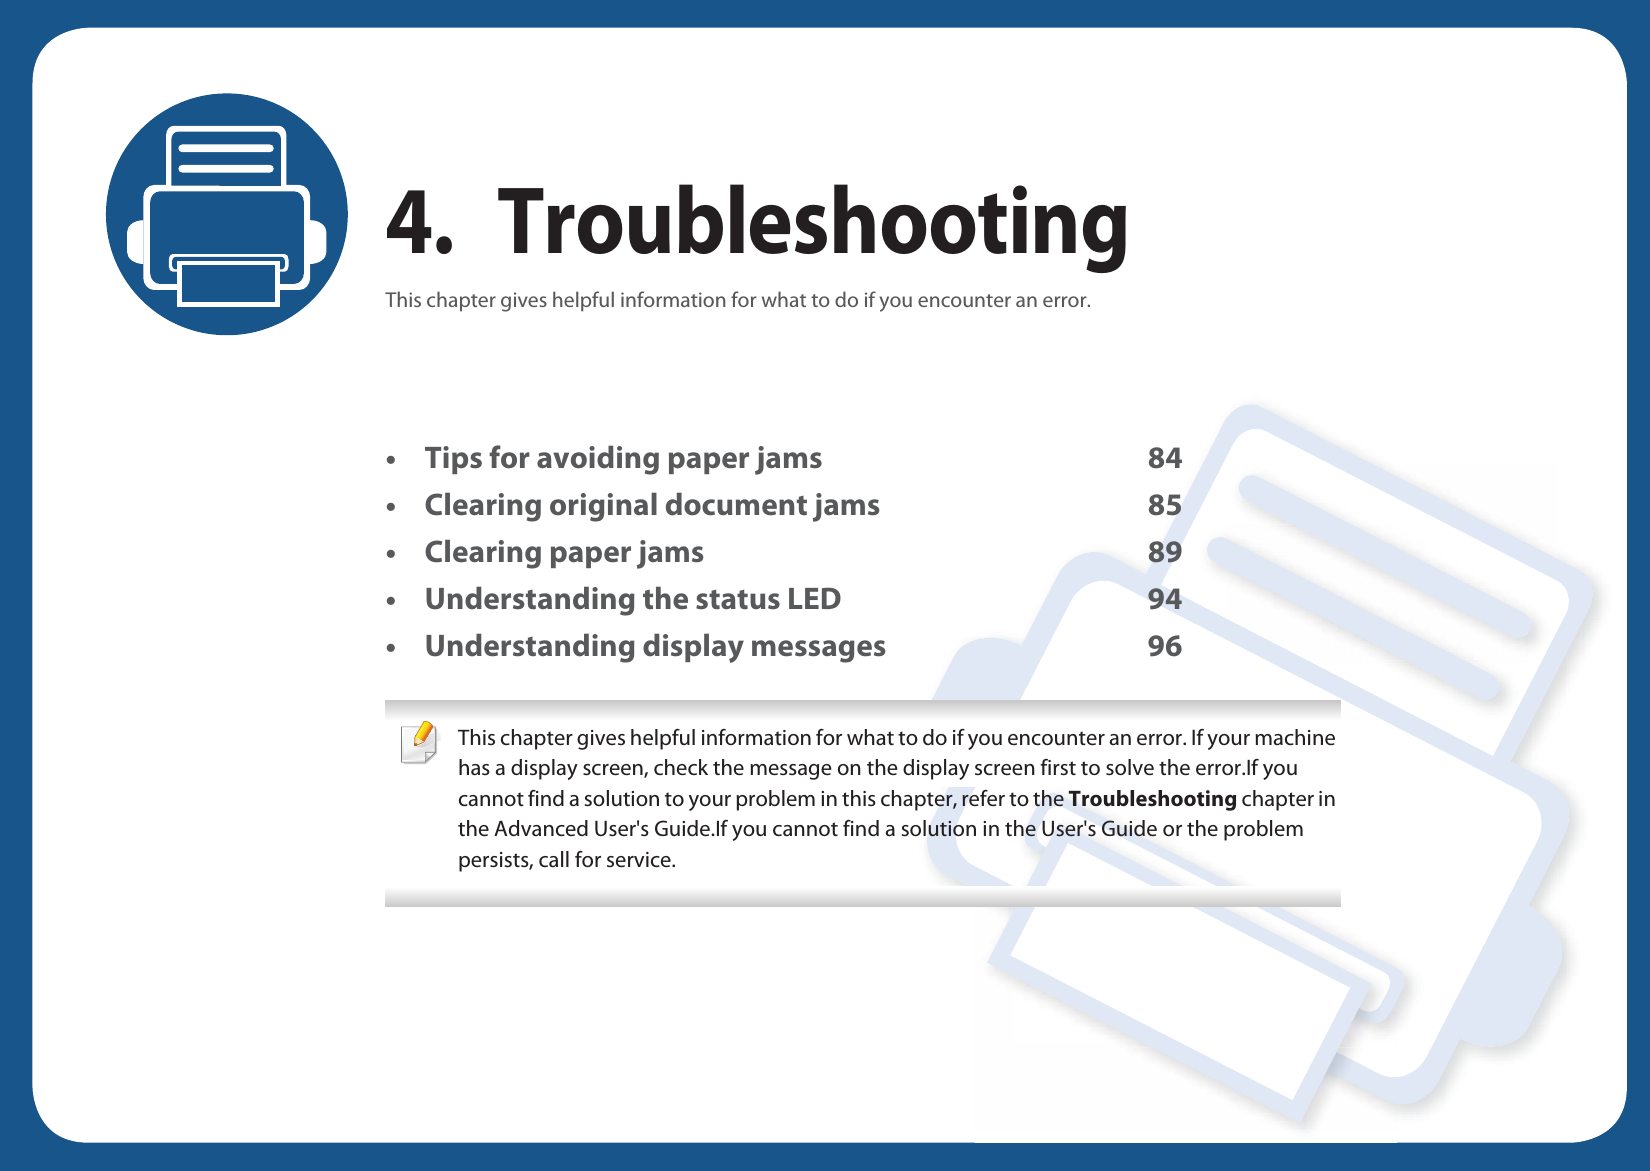 4. TroubleshootingThis chapter gives helpful information for what to do if you encounter an error.• Tips for avoiding paper jams 84• Clearing original document jams 85• Clearing paper jams 89• Understanding the status LED 94• Understanding display messages 96 This chapter gives helpful information for what to do if you encounter an error. If your machine has a display screen, check the message on the display screen first to solve the error.If you cannot find a solution to your problem in this chapter, refer to the Troubleshooting chapter in the Advanced User&apos;s Guide.If you cannot find a solution in the User&apos;s Guide or the problem persists, call for service.  